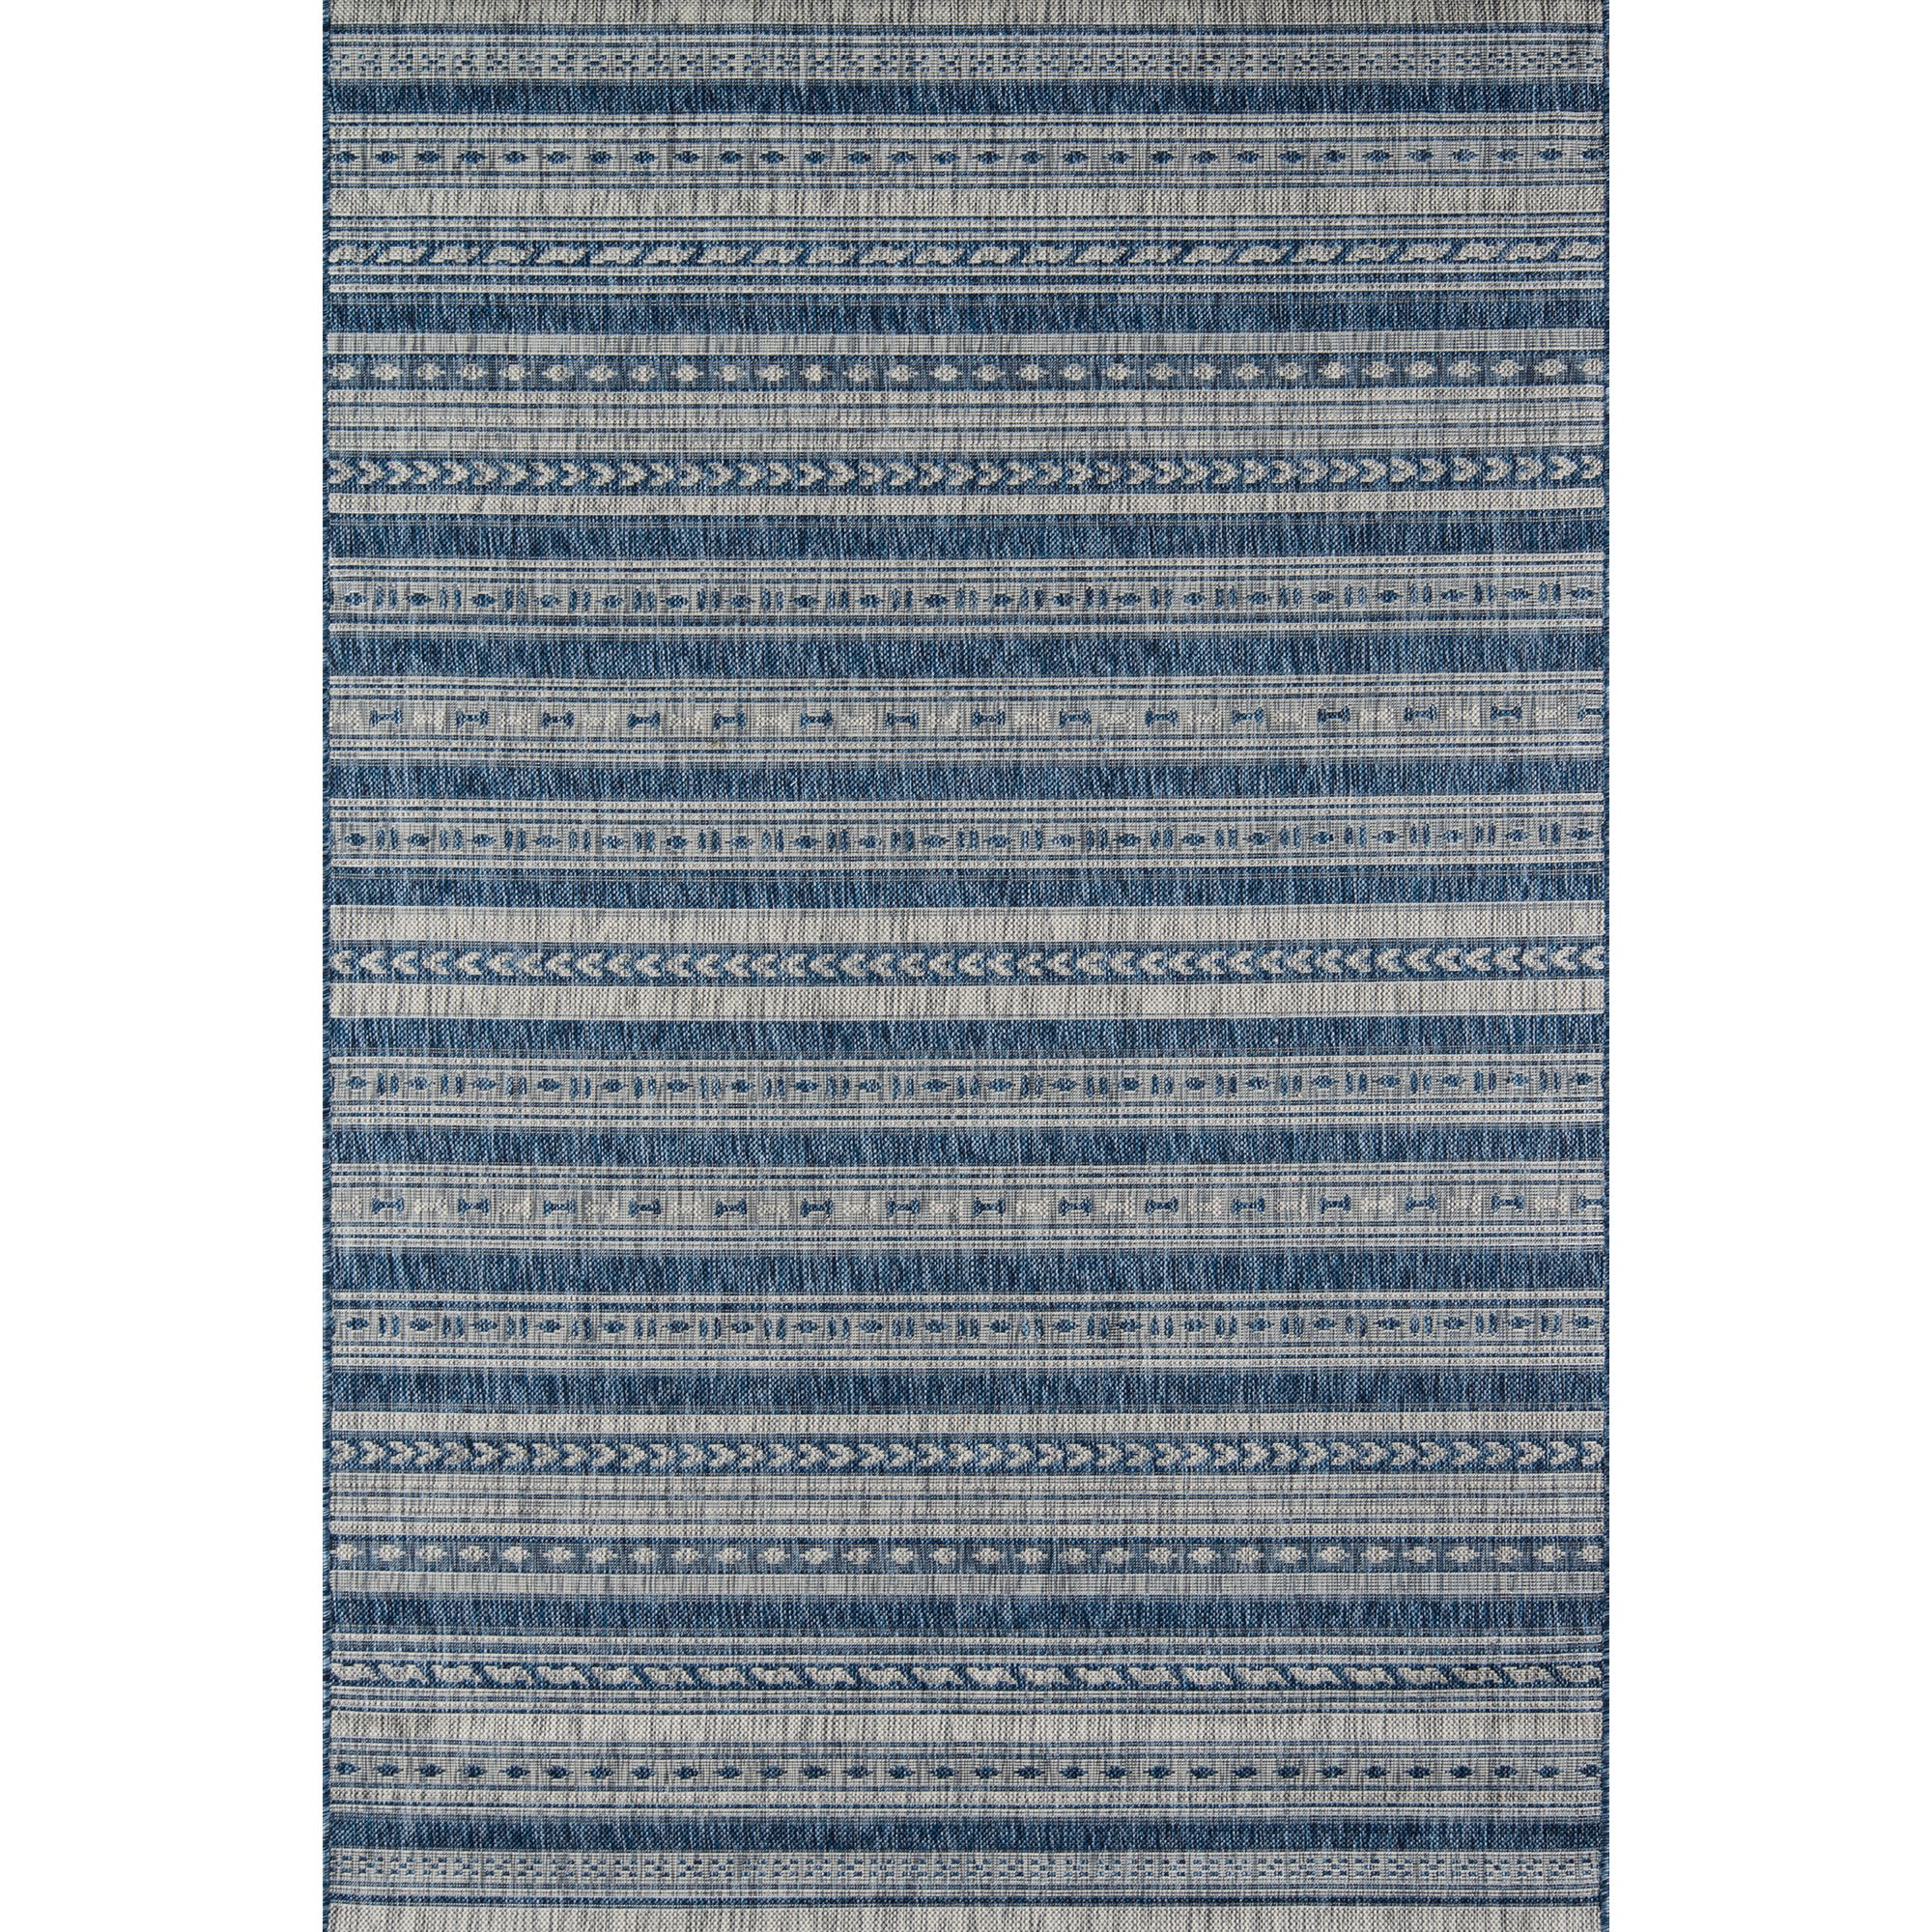 Toulouse Solid Color Machine Tufted Polyester Indoor / Outdoor Area Rug in Indigo Blue Set Eider & Ivory Rug Size: Rectangle 2' x 4